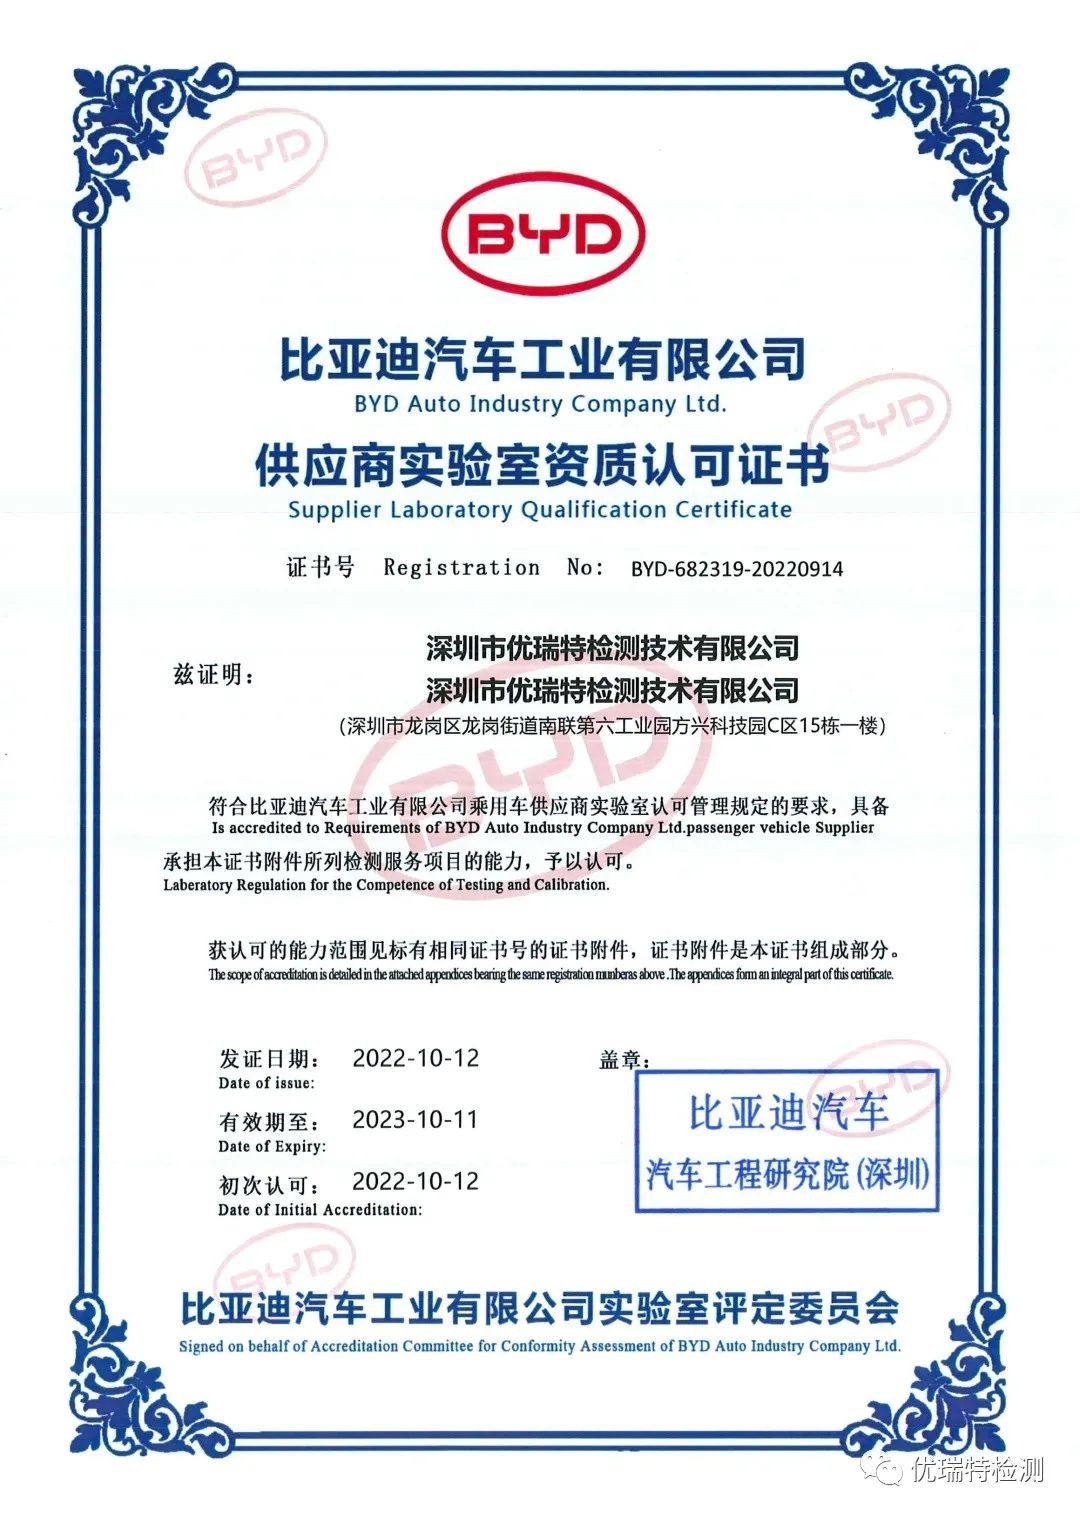 Good news | ORT testing has been recognized as a third-party laboratory qualification by BYD Automot